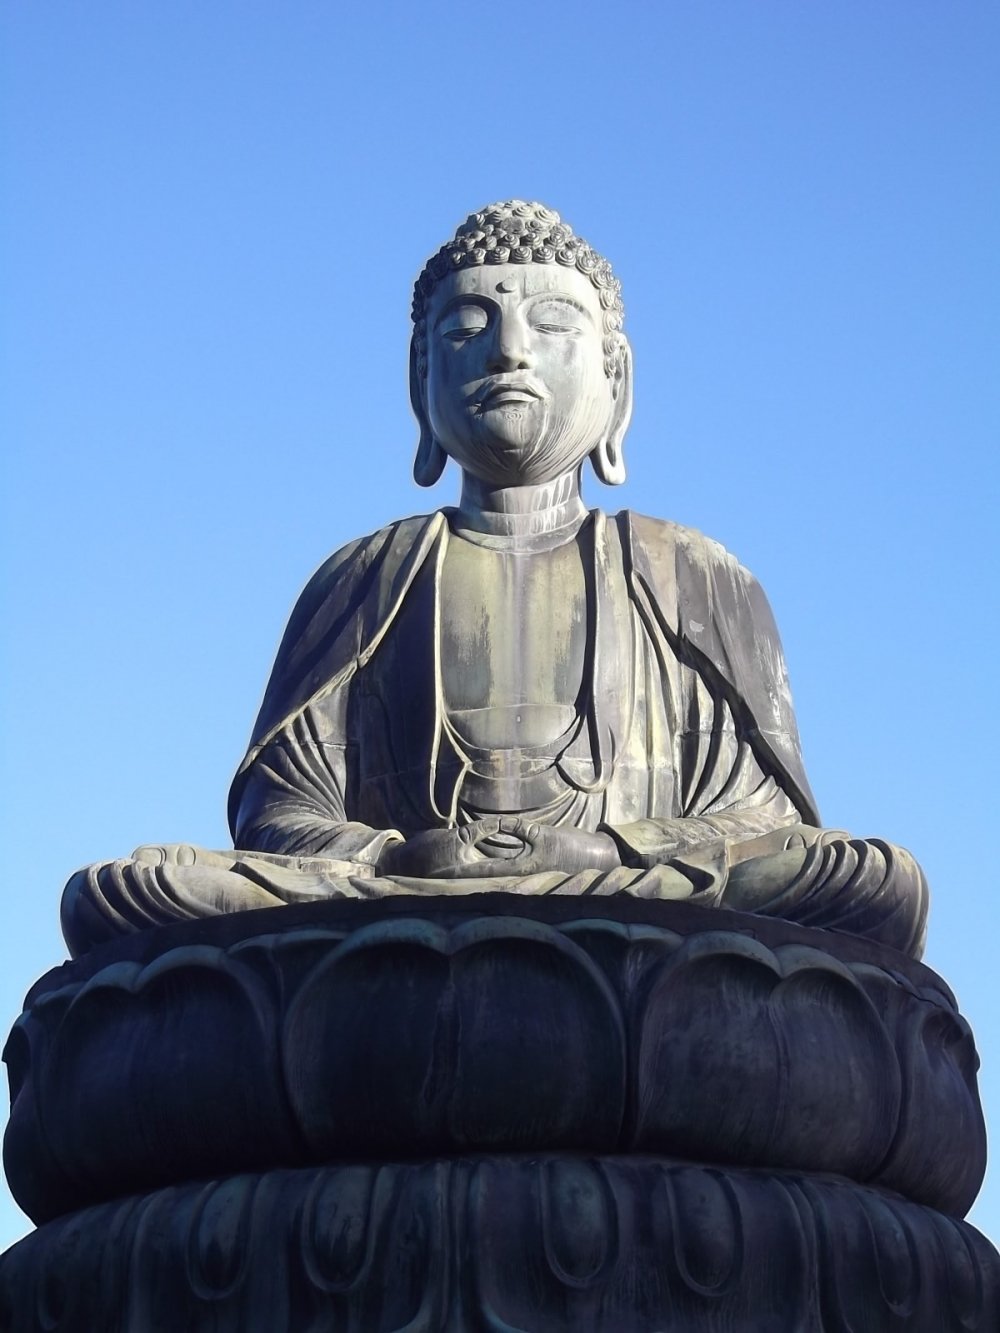 A close-up of the Buddha's serene posture and face